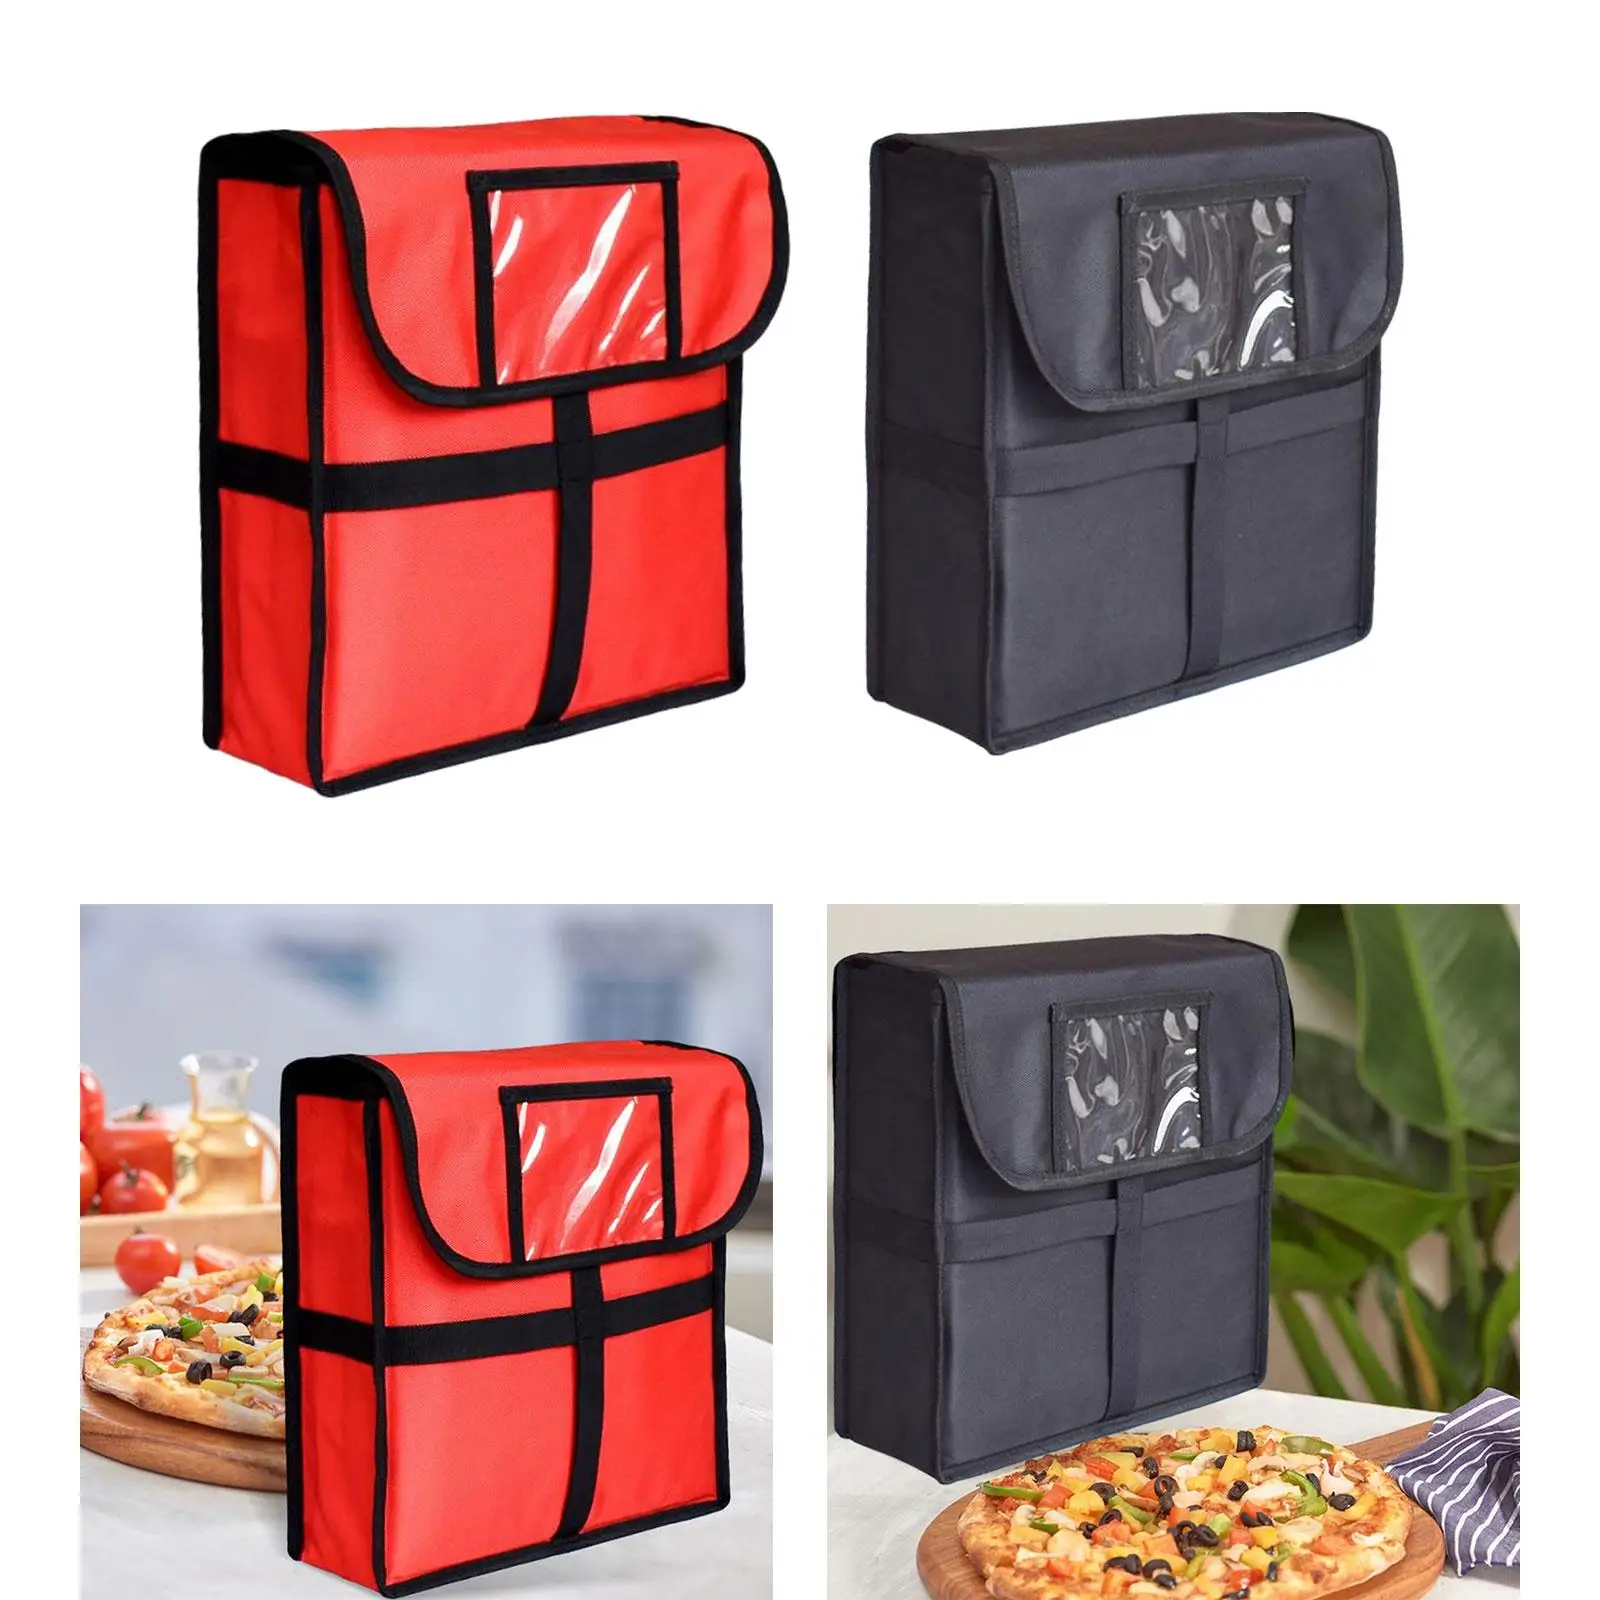 Pizza Develivey Bag Reinforced Carry Handle Fresh Keeping 12.99inchx12.99inchx4.33inch Large Capacity for Travel Shopping Picnic